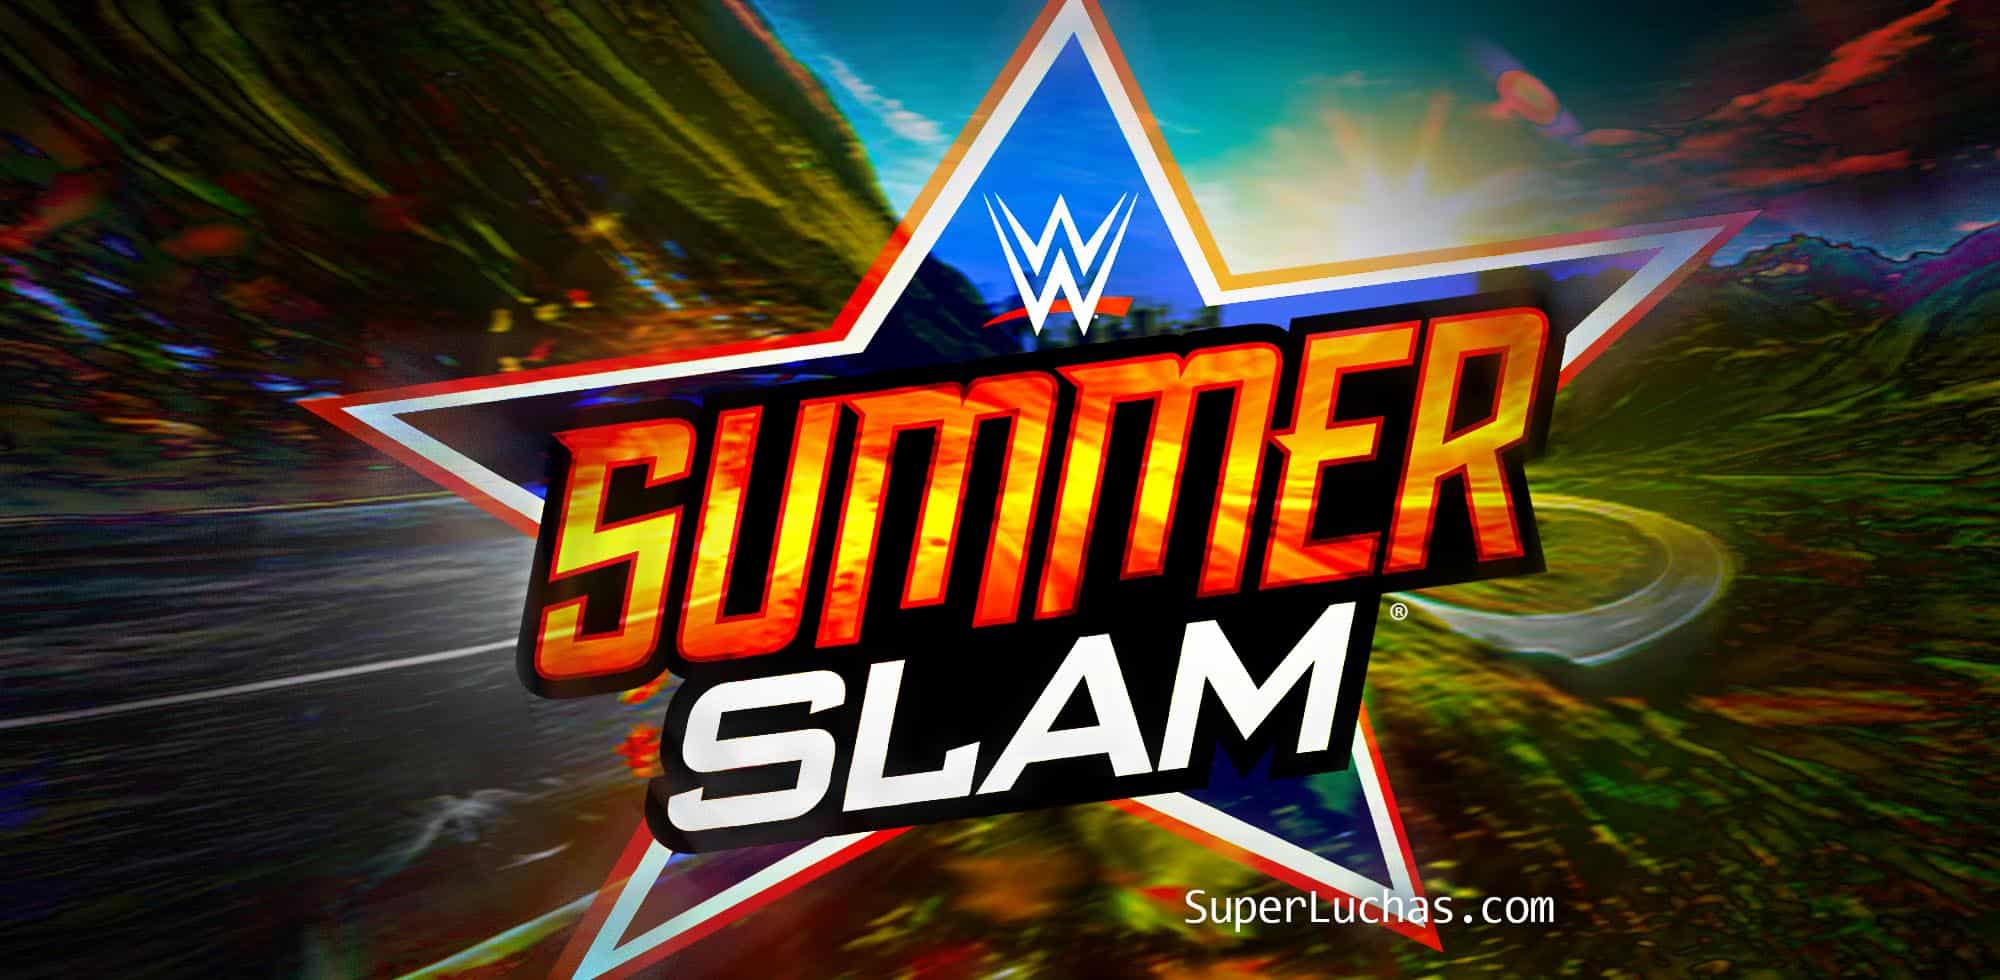 Two great struggles could be plotting for SummerSlam 2020